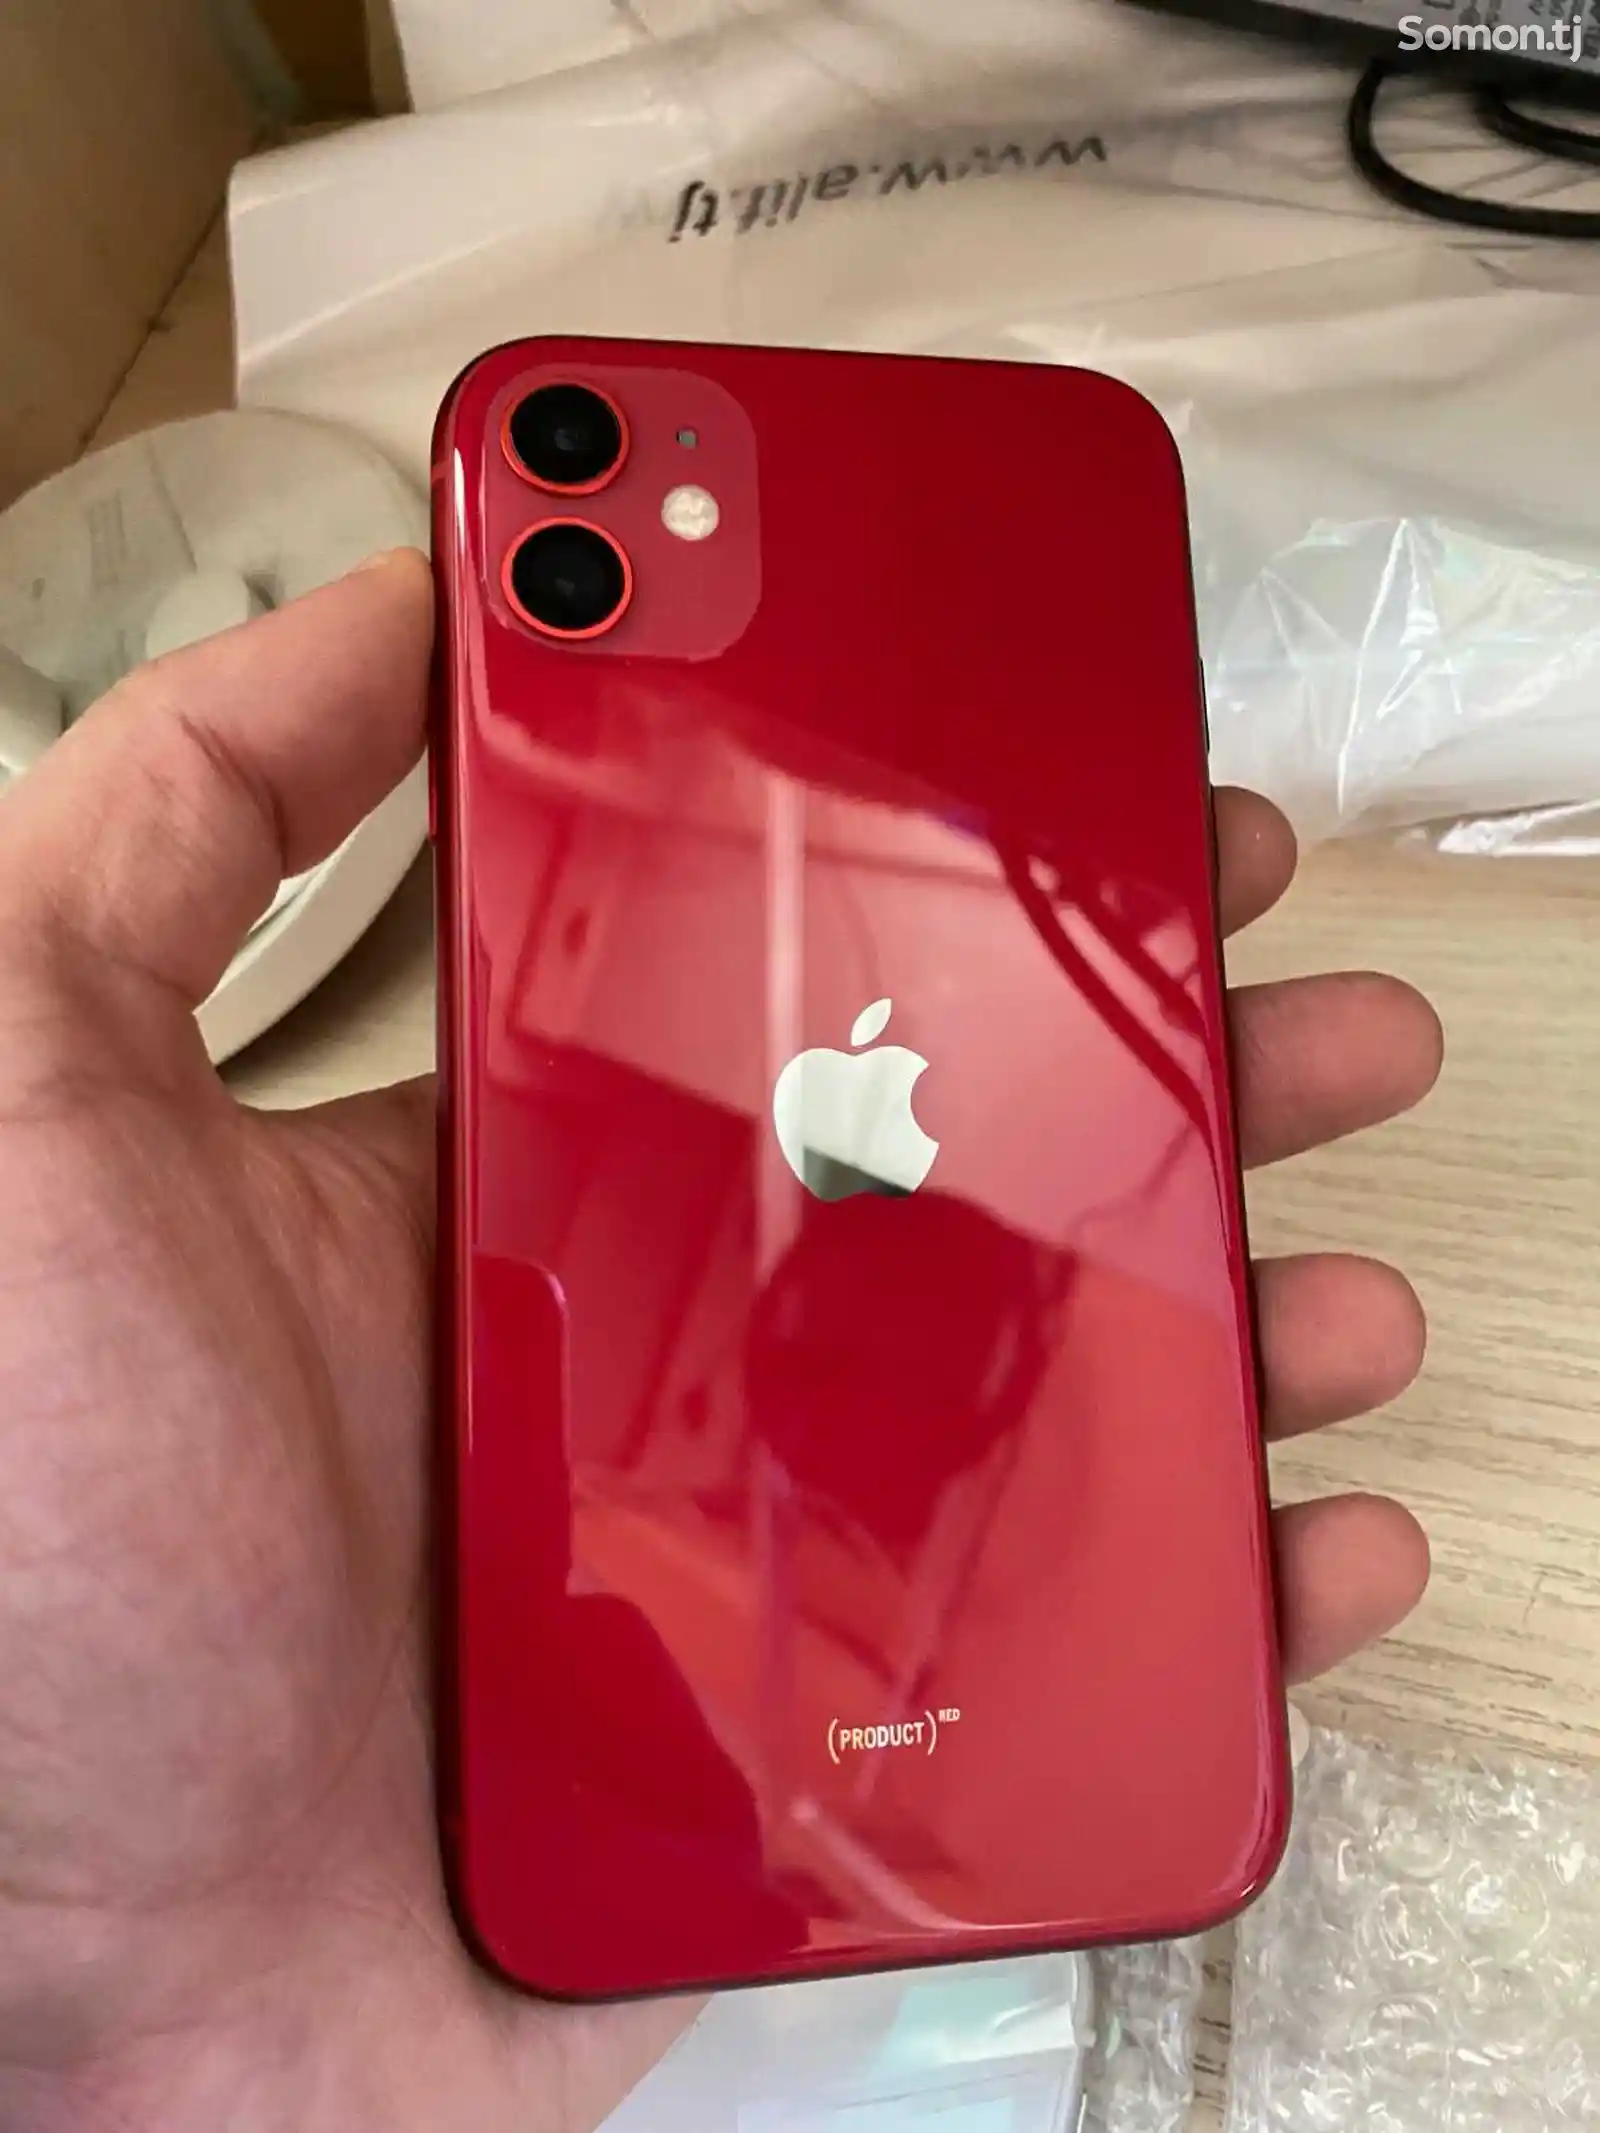 Apple iPhone 11, 128 gb, Product Red